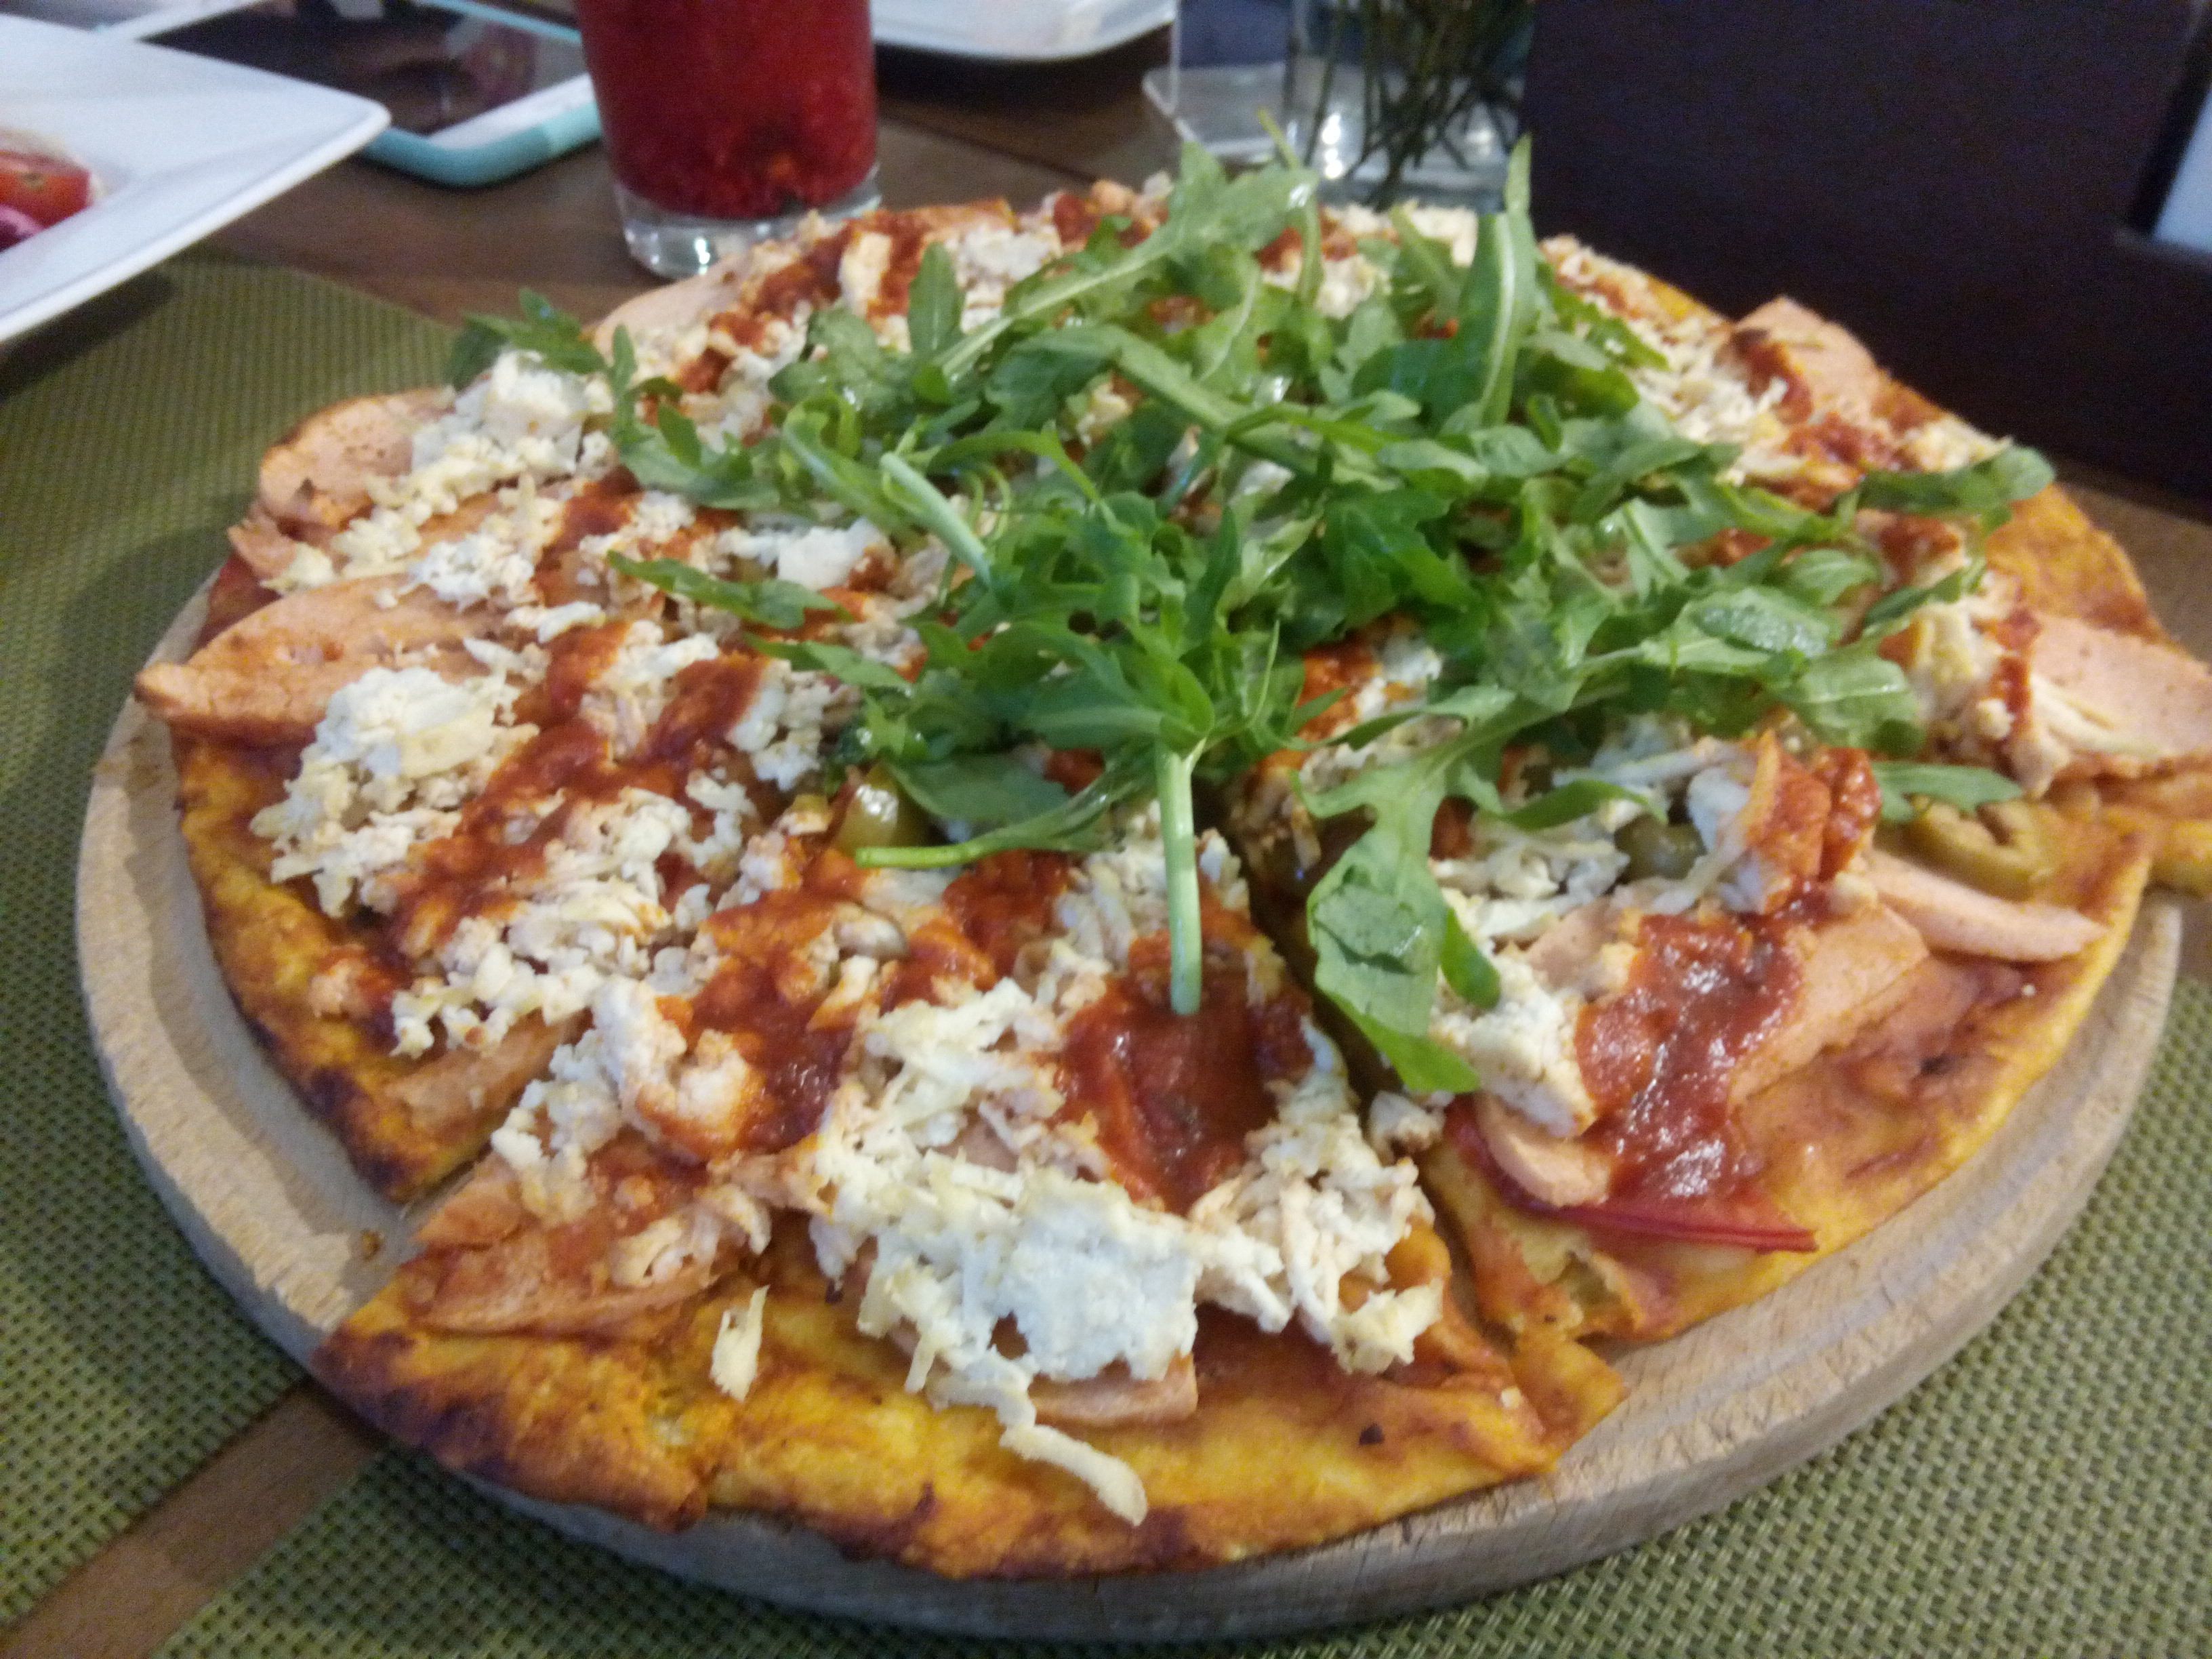 A large pizza with seitan, tomato, vegan cheese, scattered greens